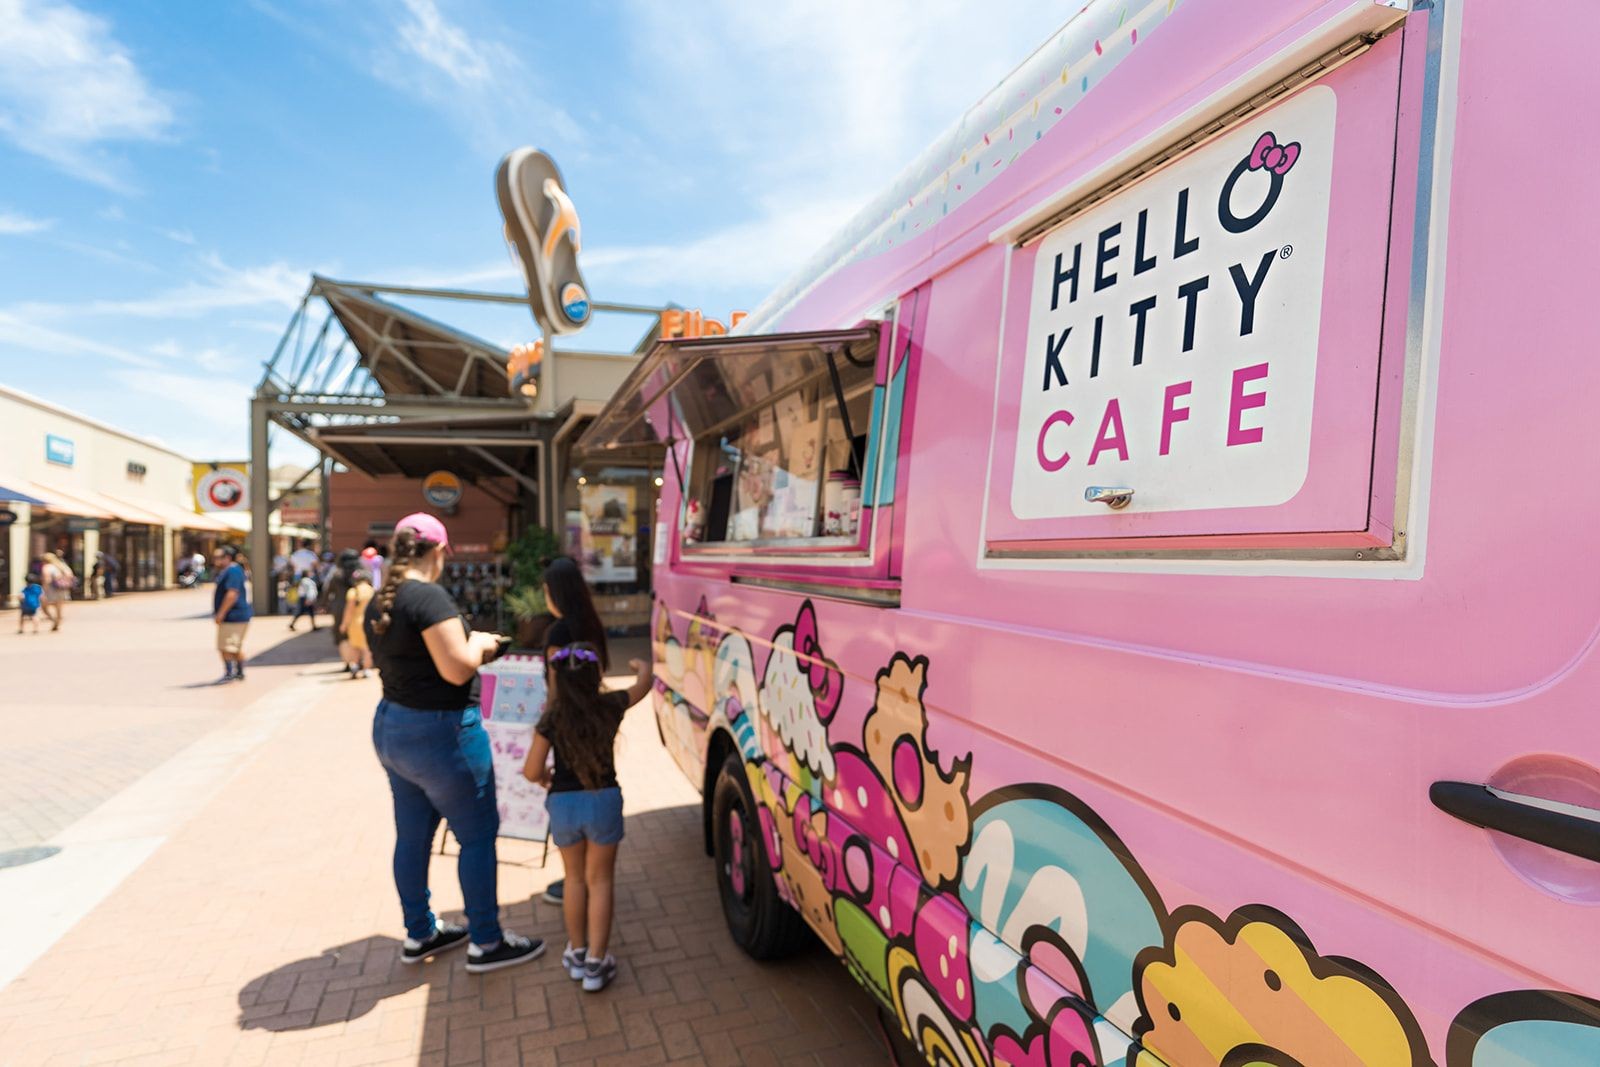 Hello Kitty Cafe Truck: 10 things you might not know about Hello Kitty